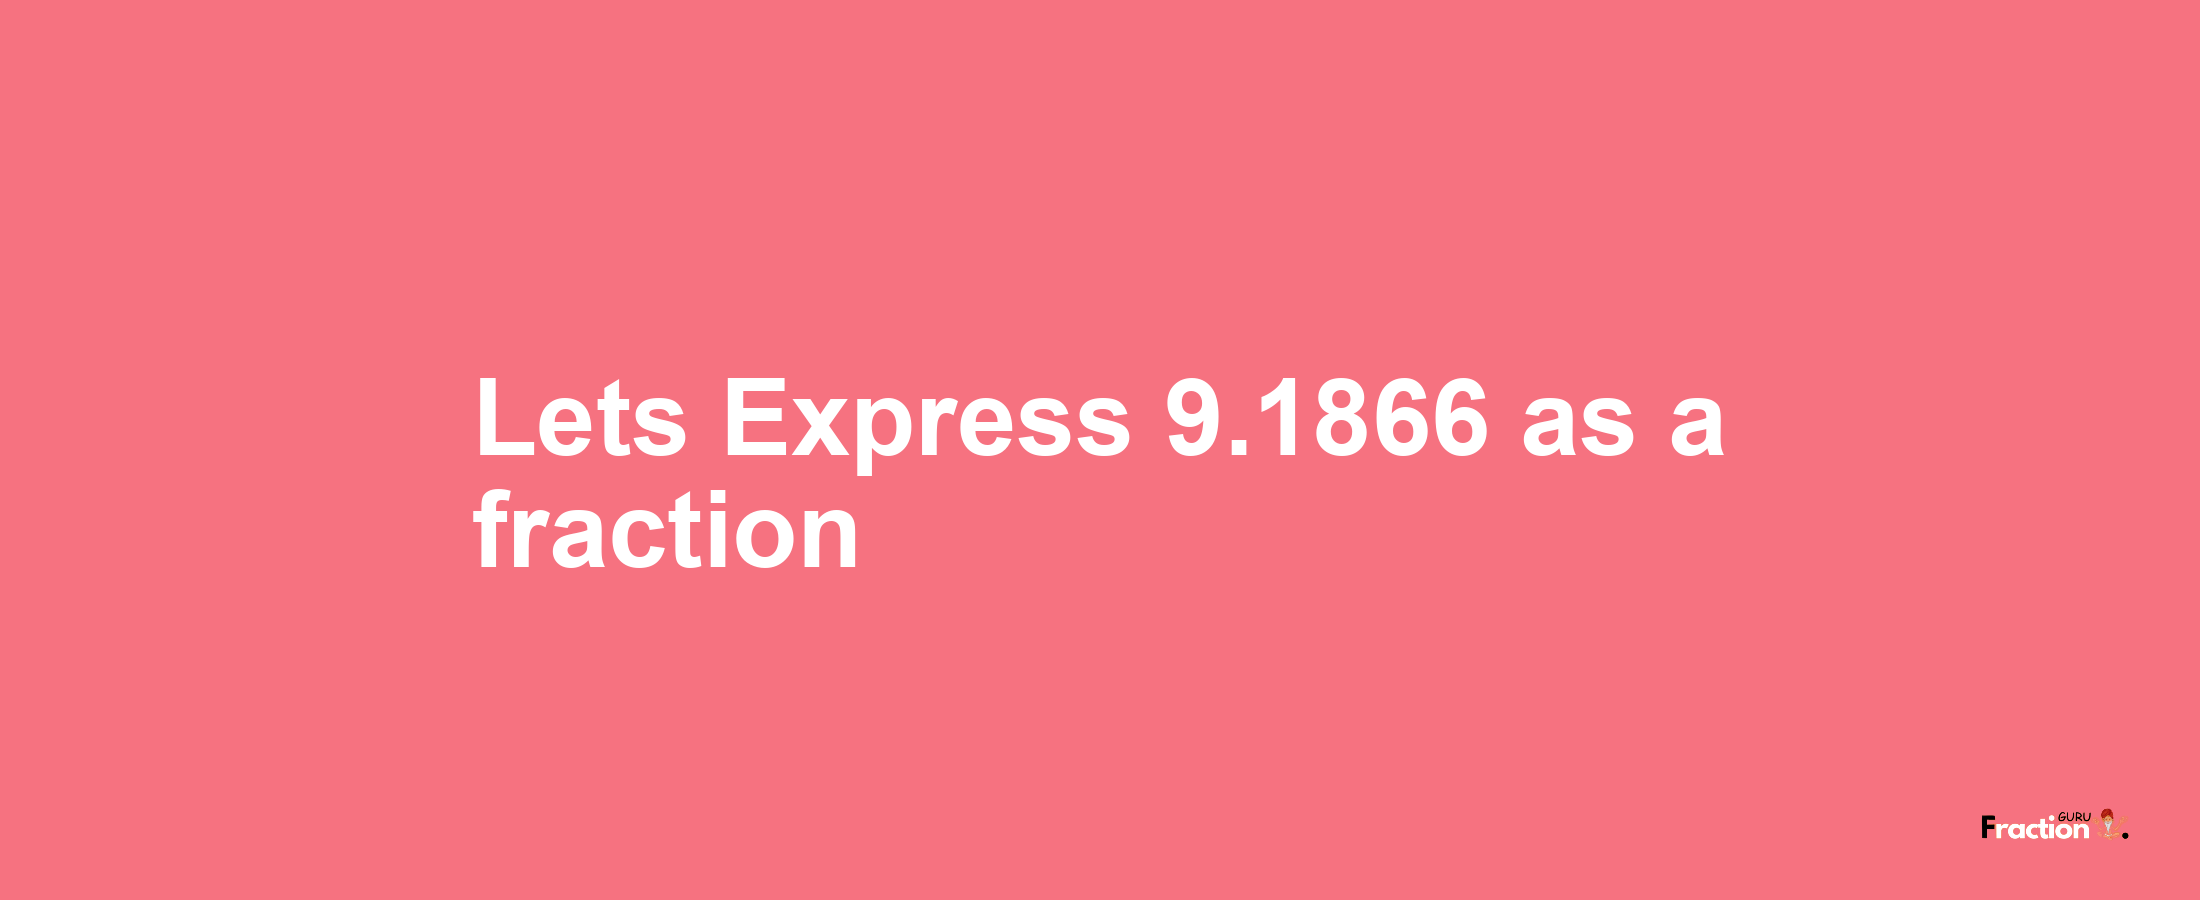 Lets Express 9.1866 as afraction